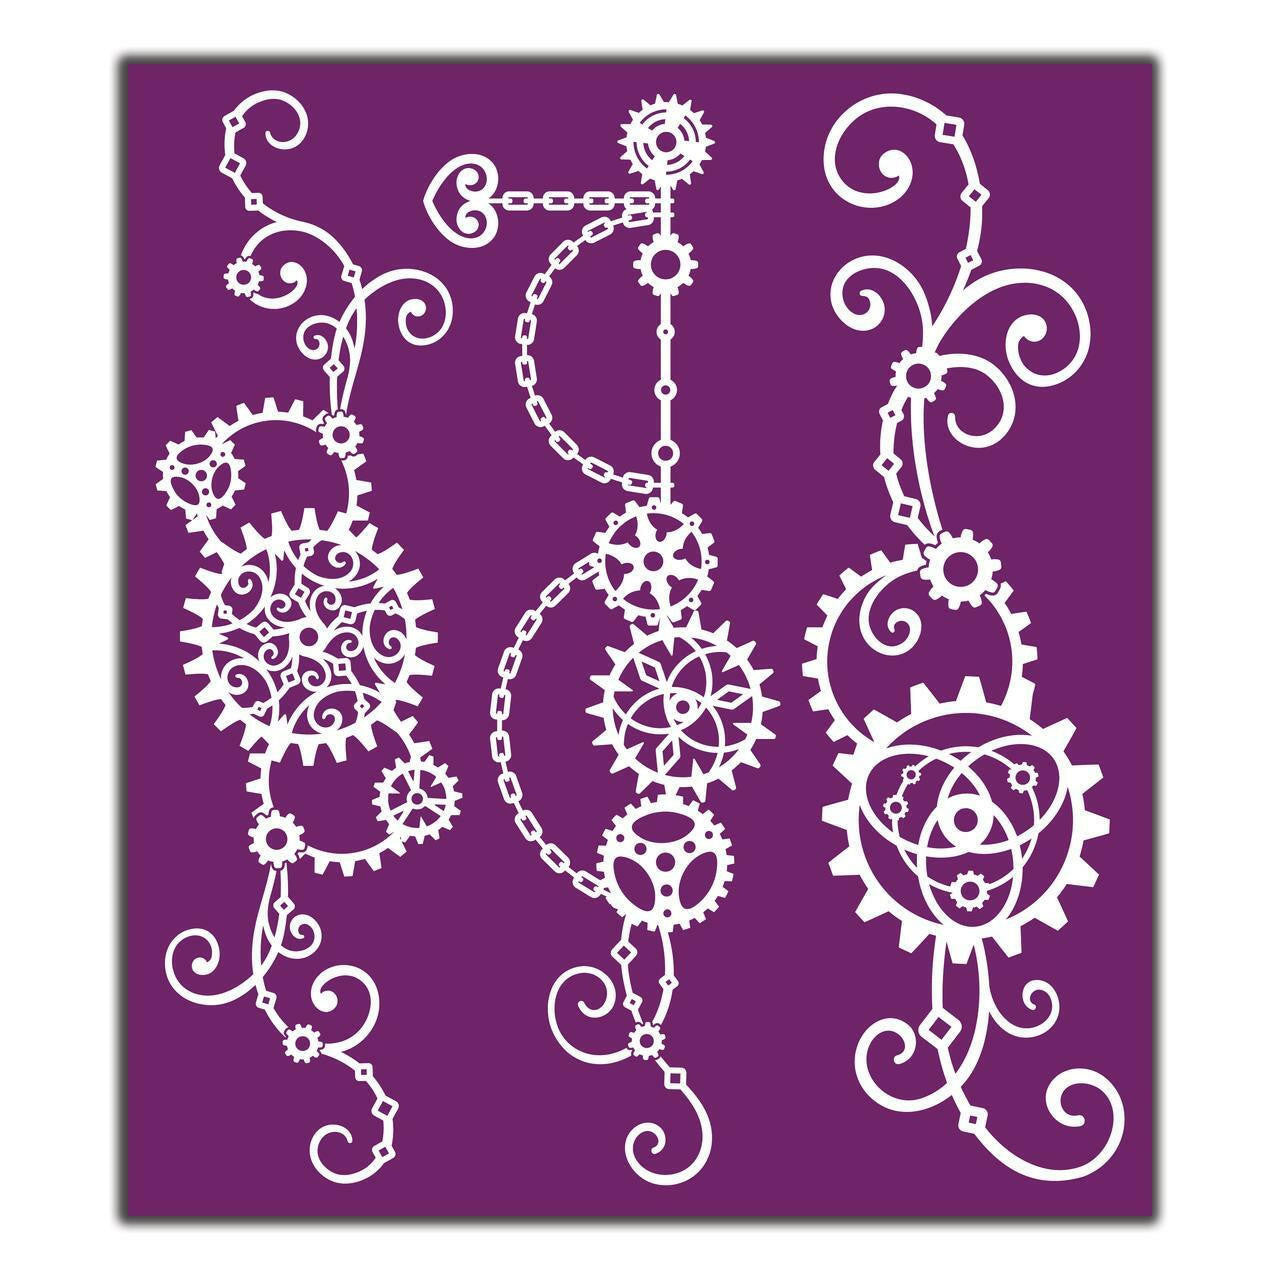 STEAMPUNK Silk Screen Stencils 3 designs 8" x 10" by Belles and Whistles